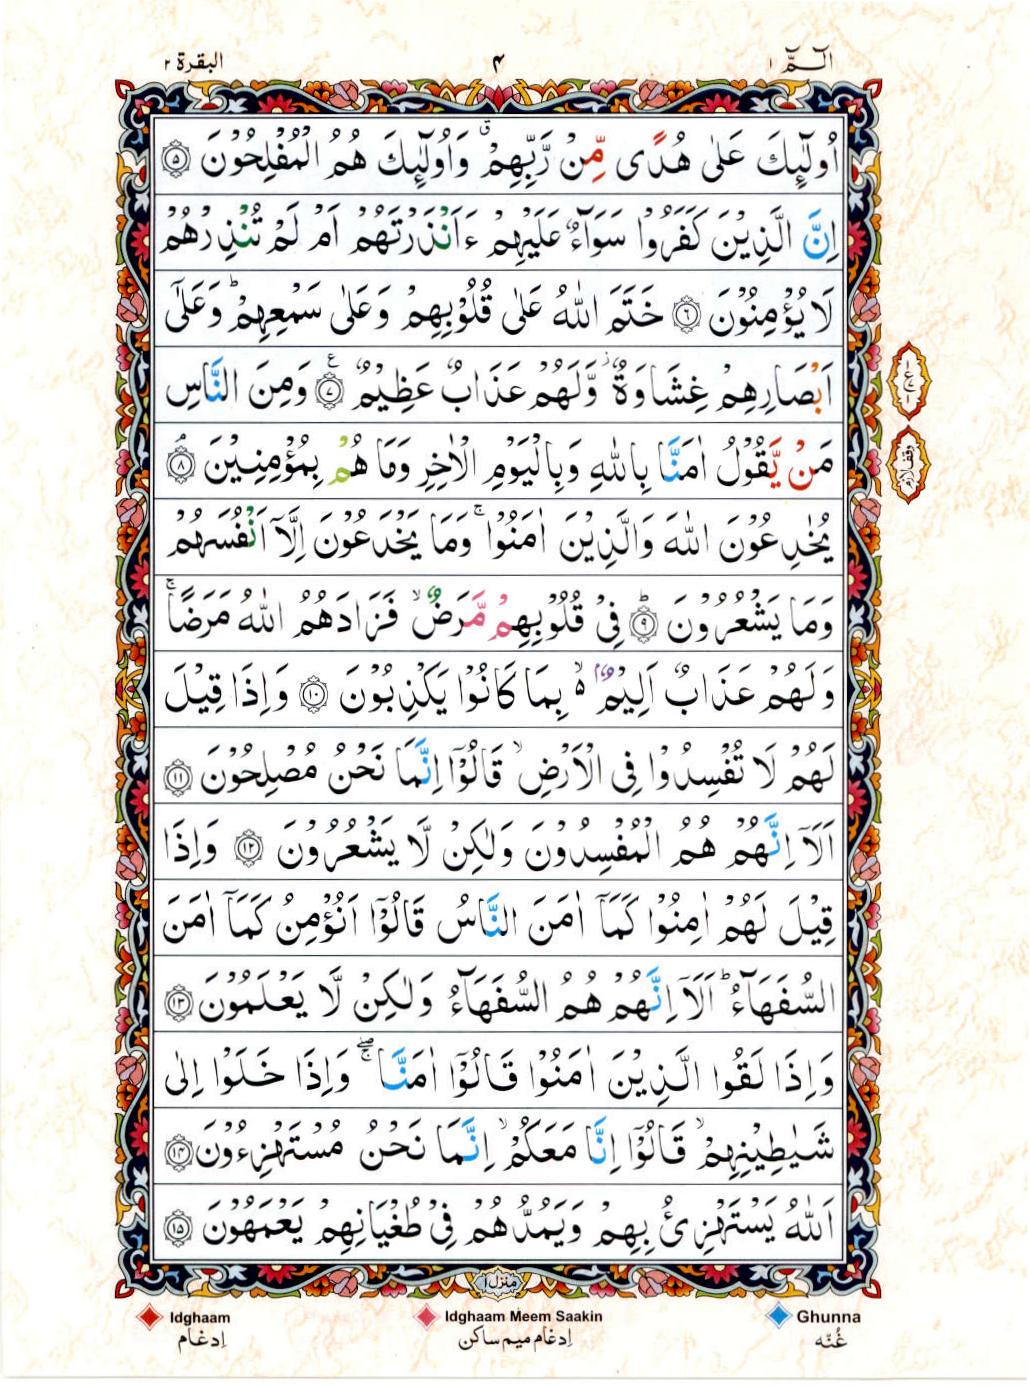 Read 15 Lines Coloured Coded Quran Part 1 Page No 4, Practice Quran